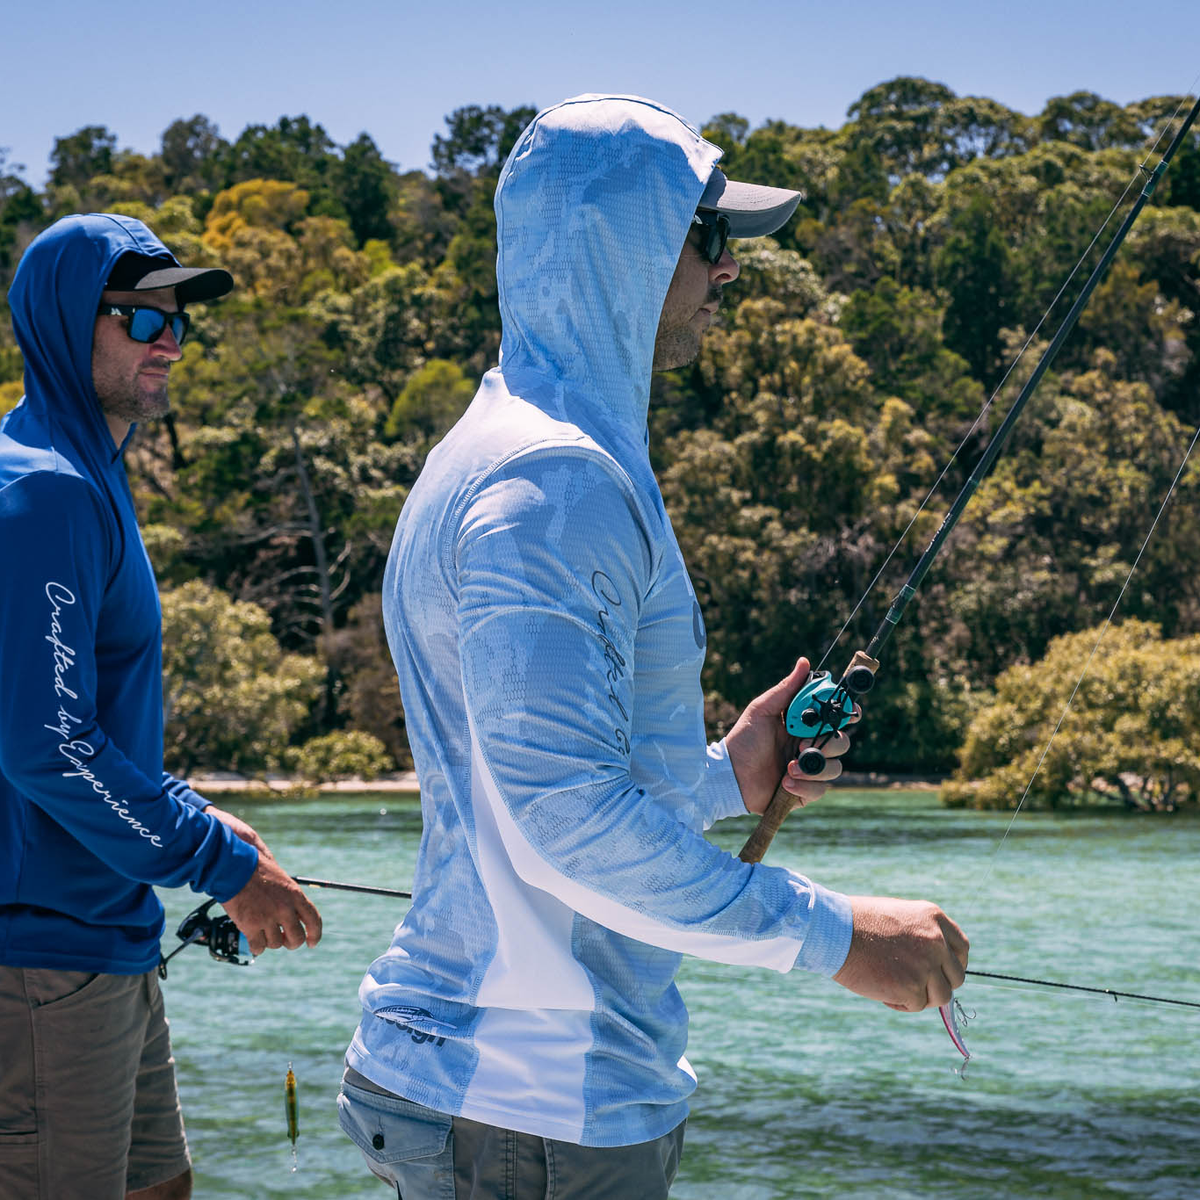 Nomad Tech Fishing Shirt Hooded - Camo Splice Blue - Outdoor Adventure  South West Rocks